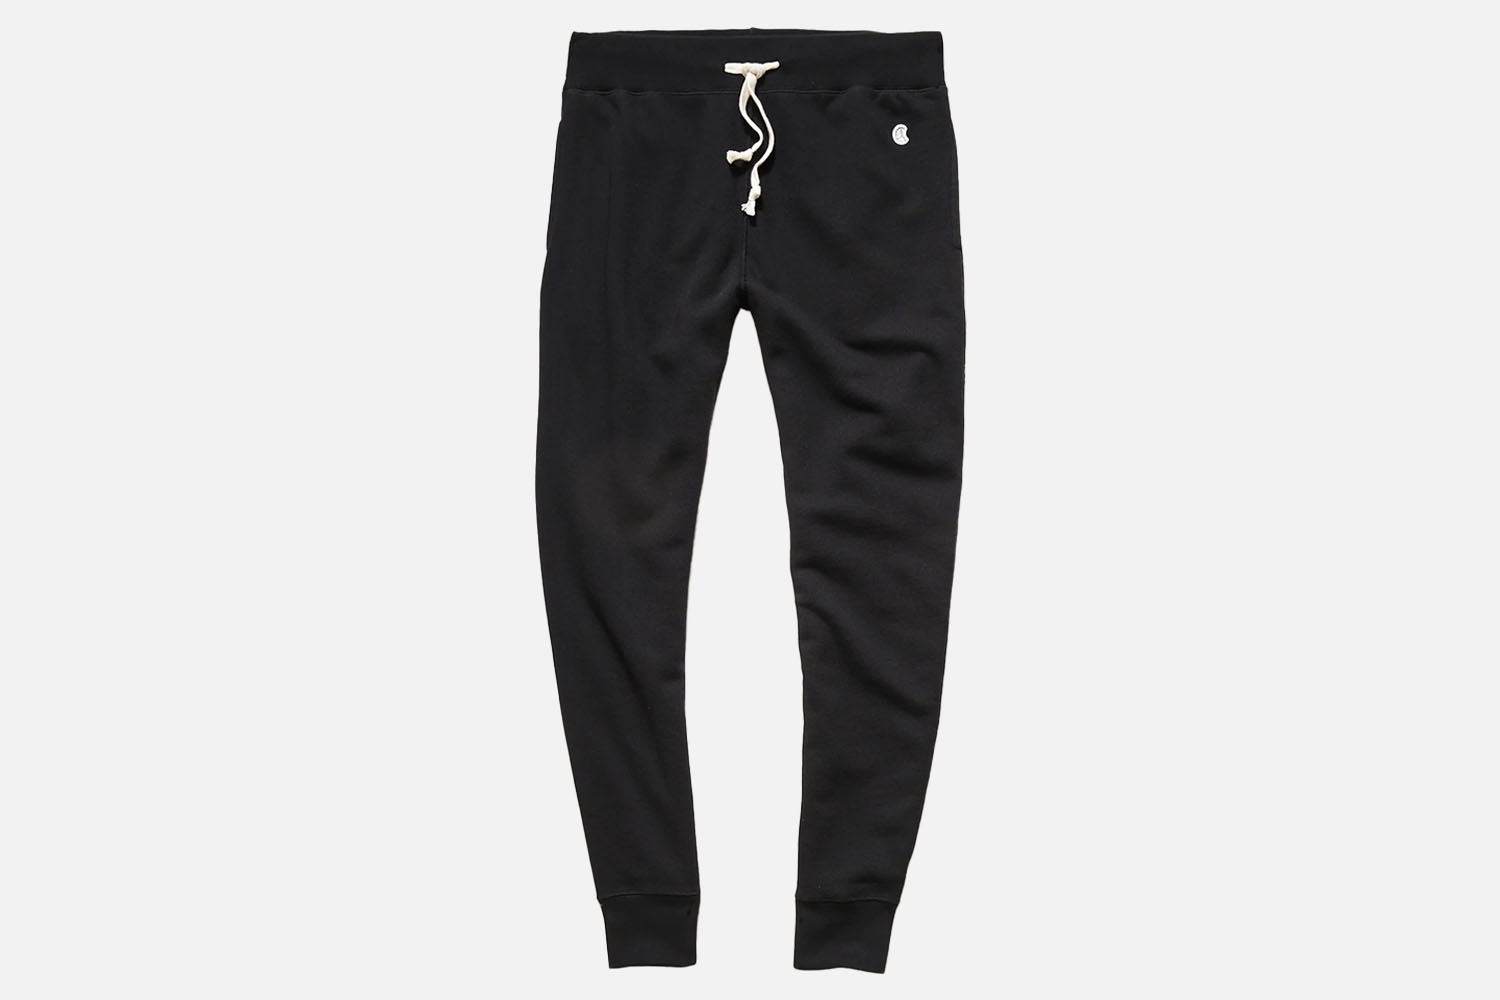 Todd Snyder + Champion Midweight Slim Jogger Sweatpant